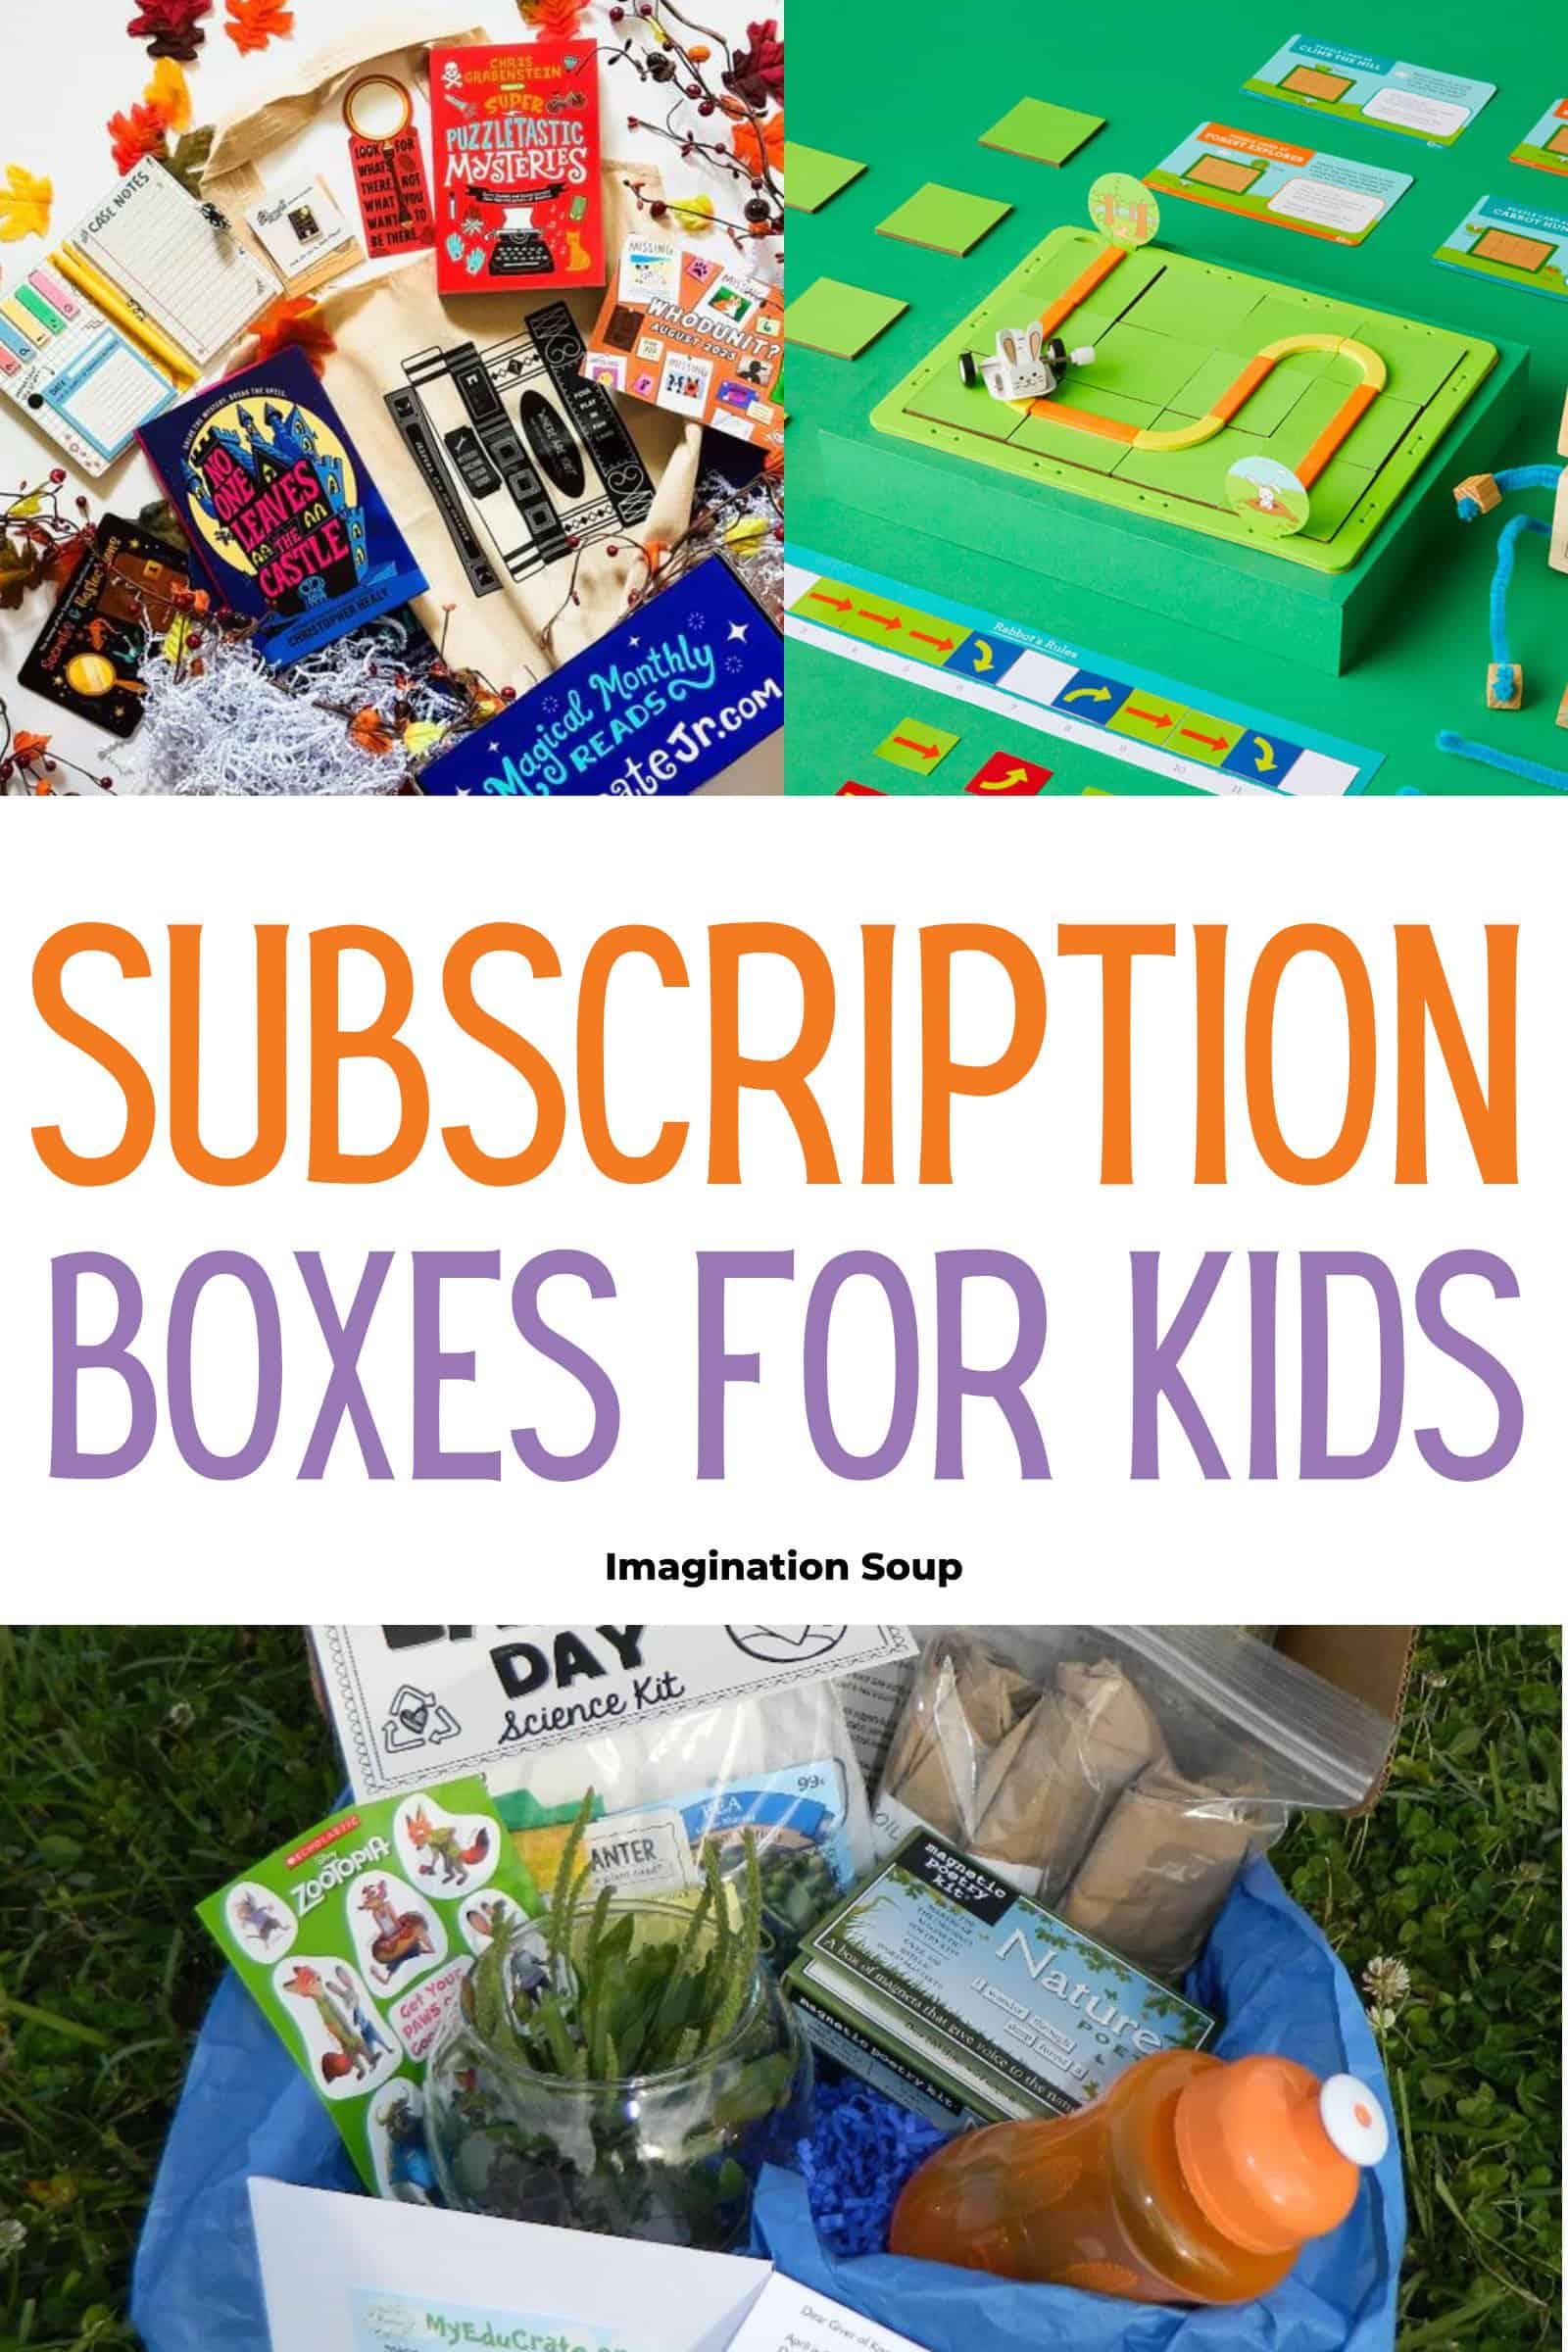 Monthly subscription boxes for kids make fantastic holiday or anytime gifts because they last all year long. You can find interesting gift boxes for all ages and many interests that will give kids new books to read, activities to do, science to learn, and more.